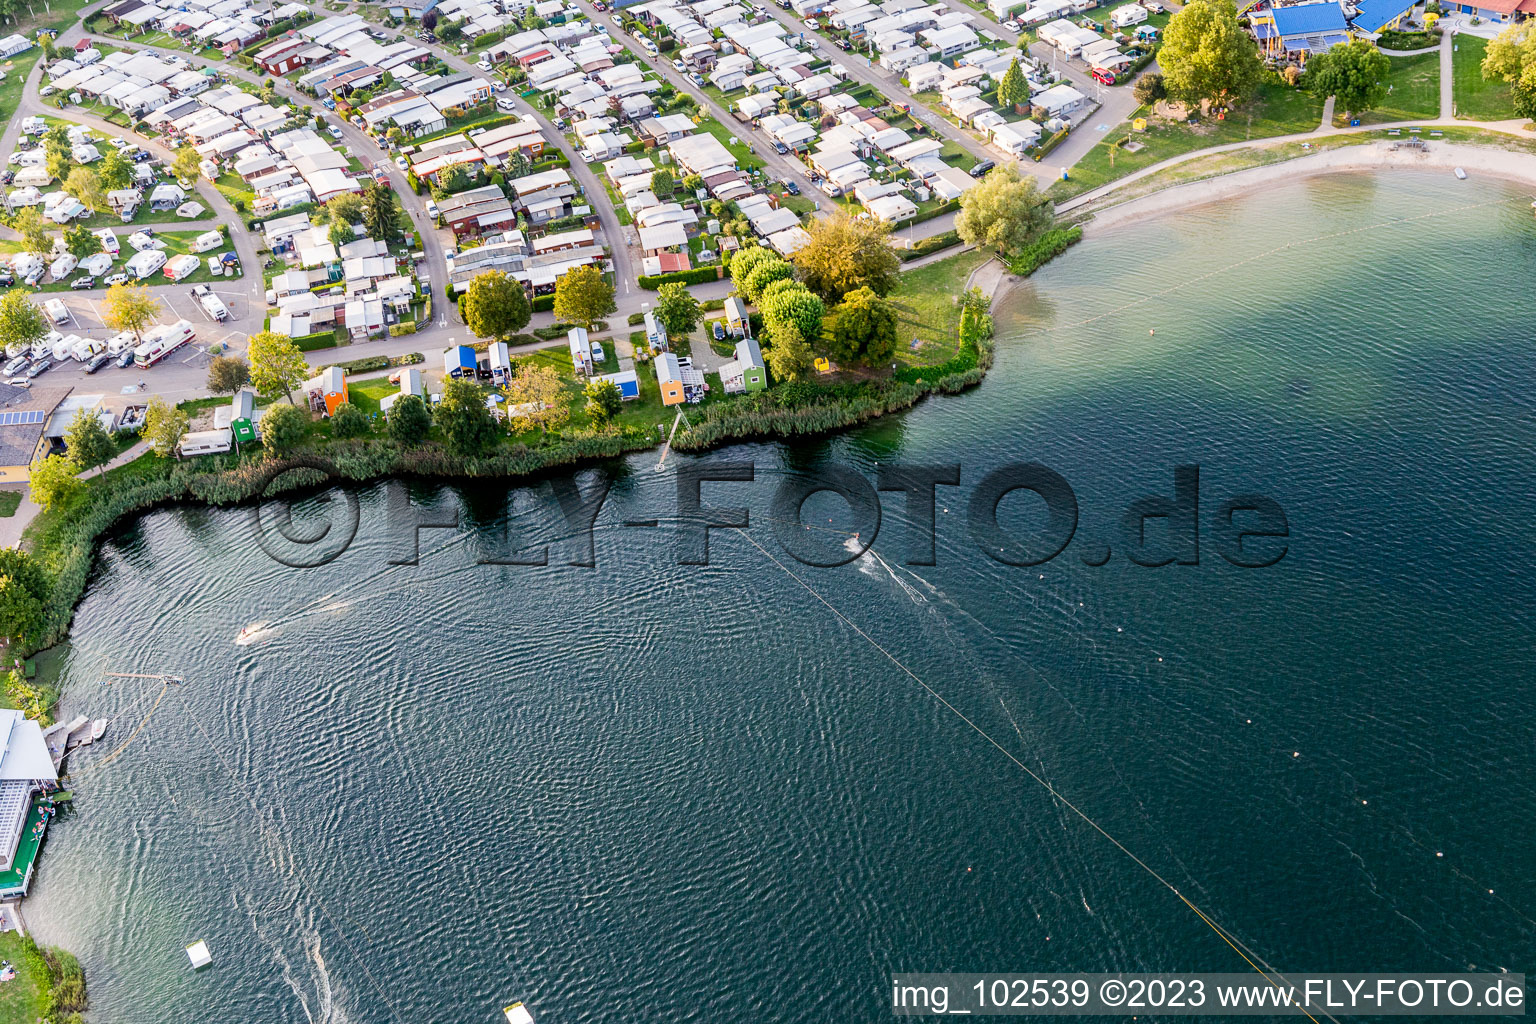 St. Leoner See, water ski facility in the district Sankt Leon in St. Leon-Rot in the state Baden-Wuerttemberg, Germany from the plane